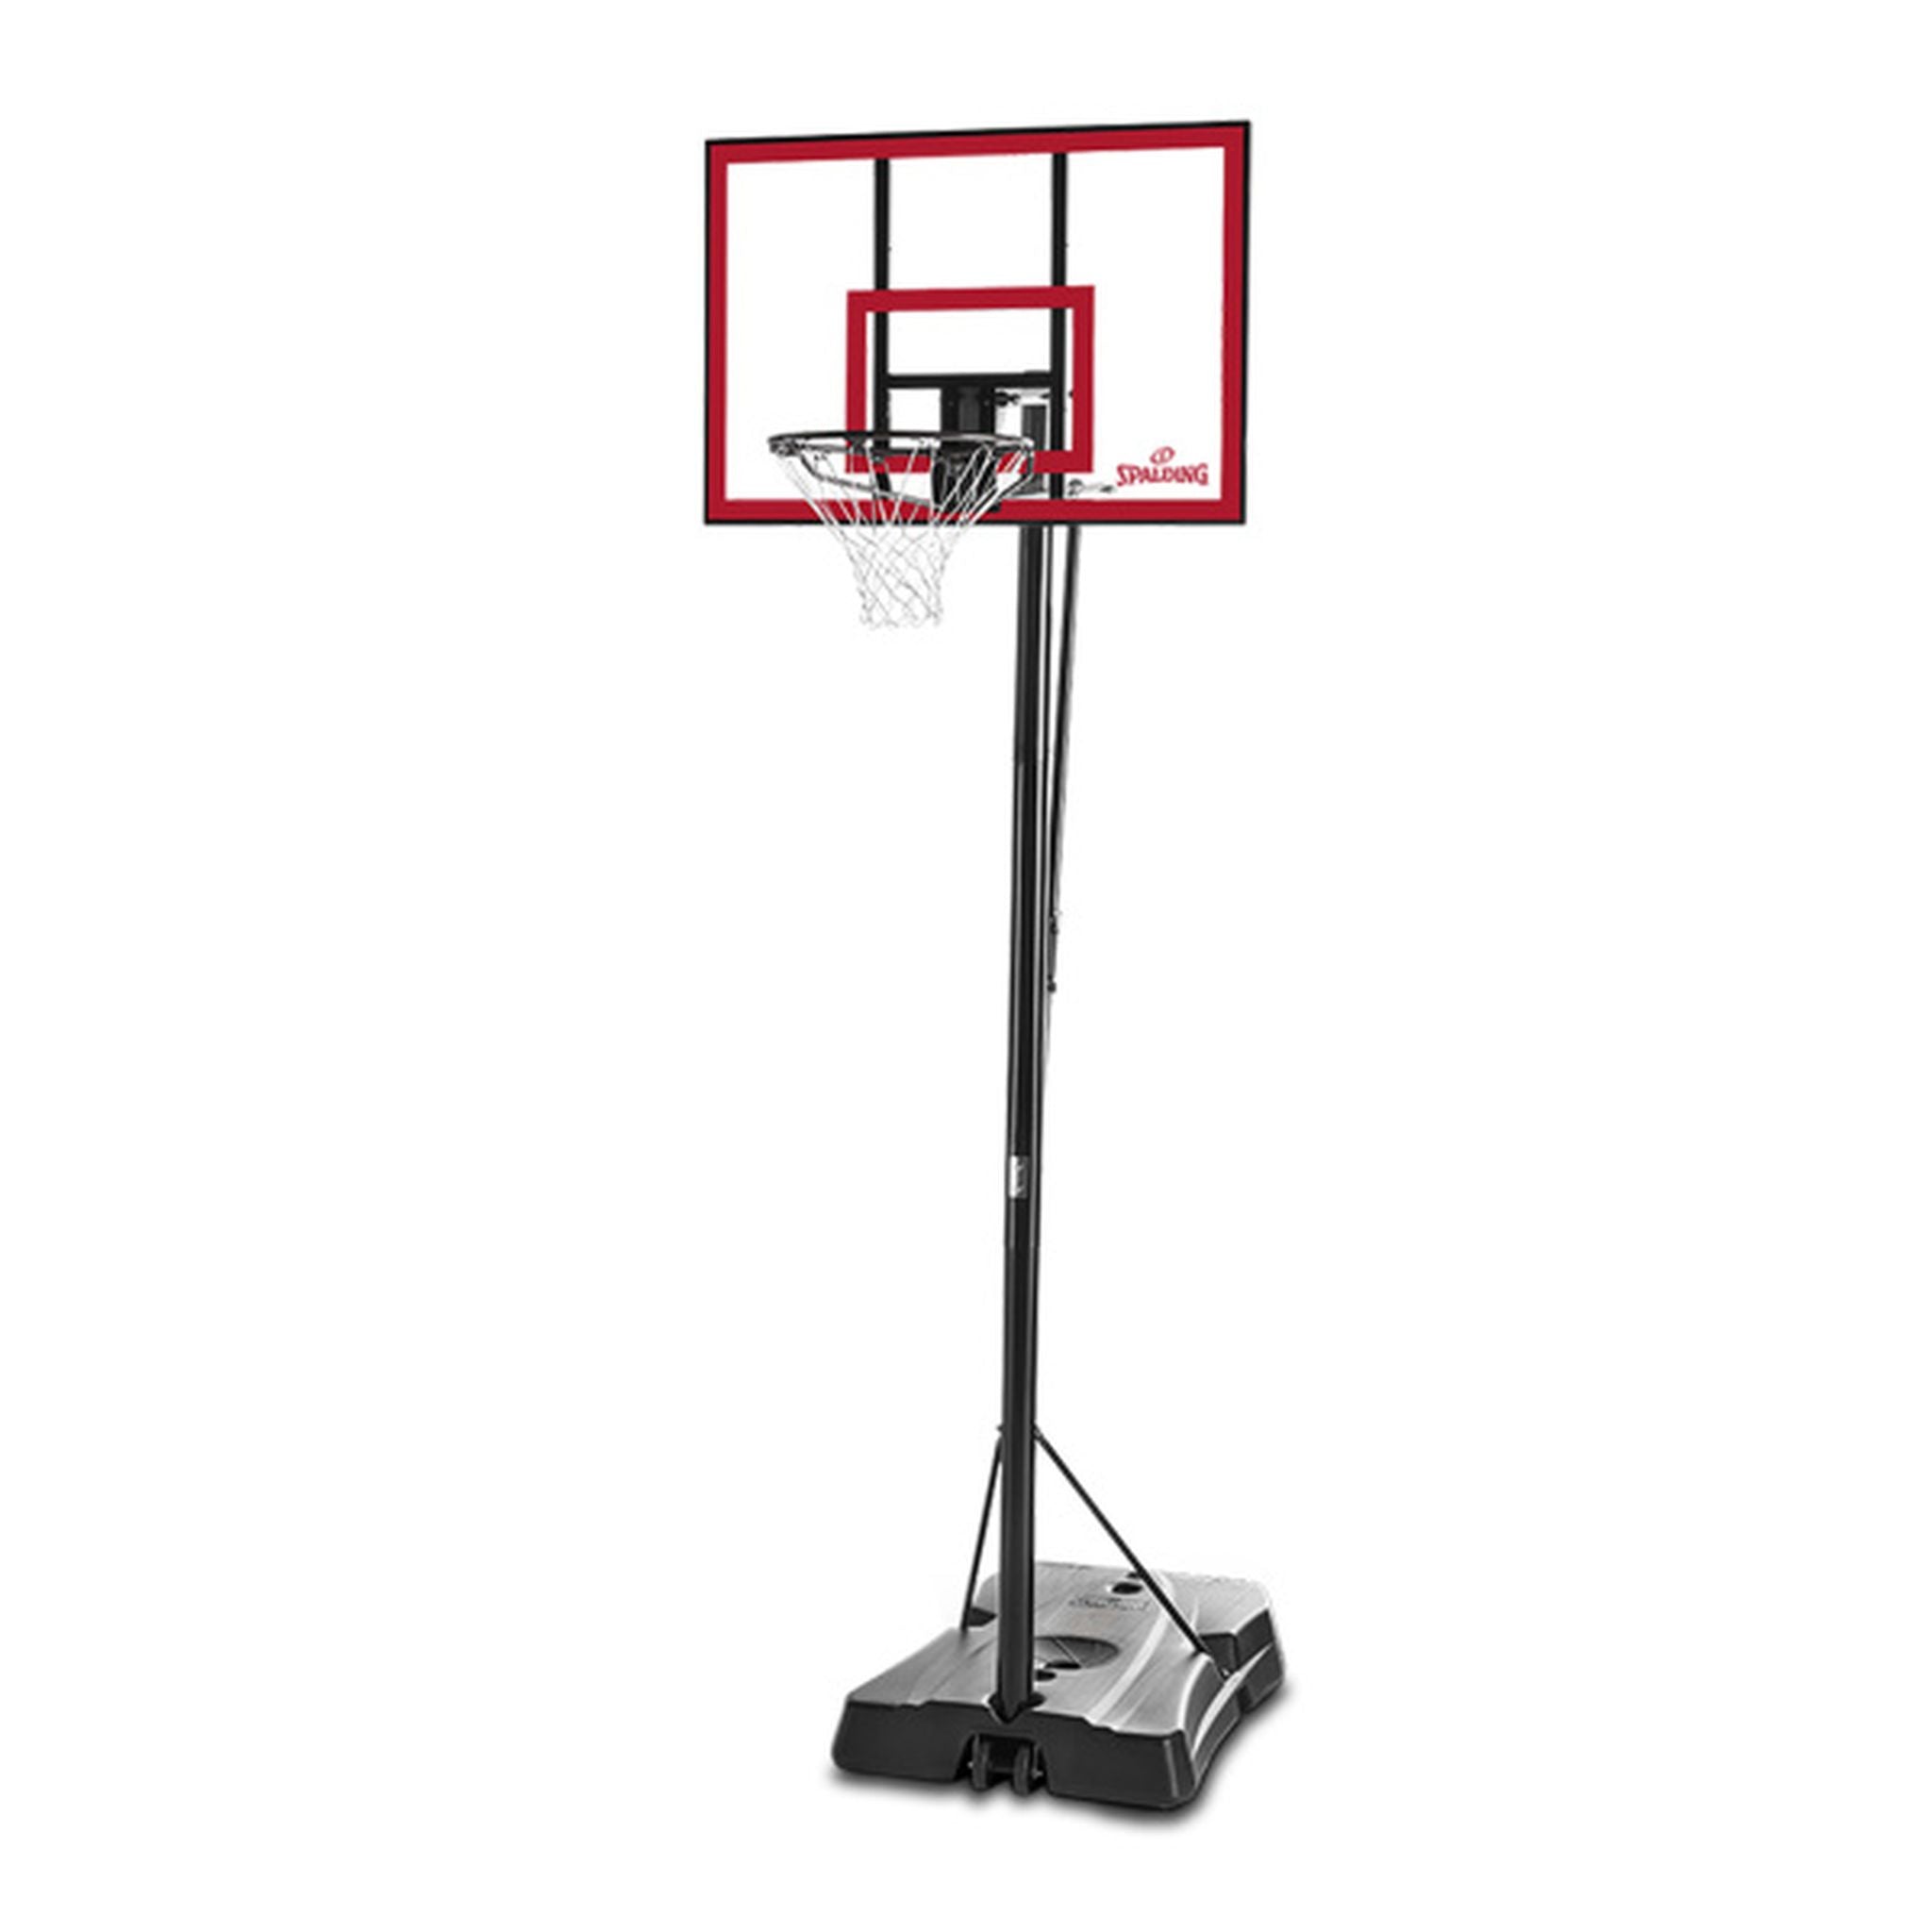 Spalding 44-inch Pro Glide Poly Portable Basketball System